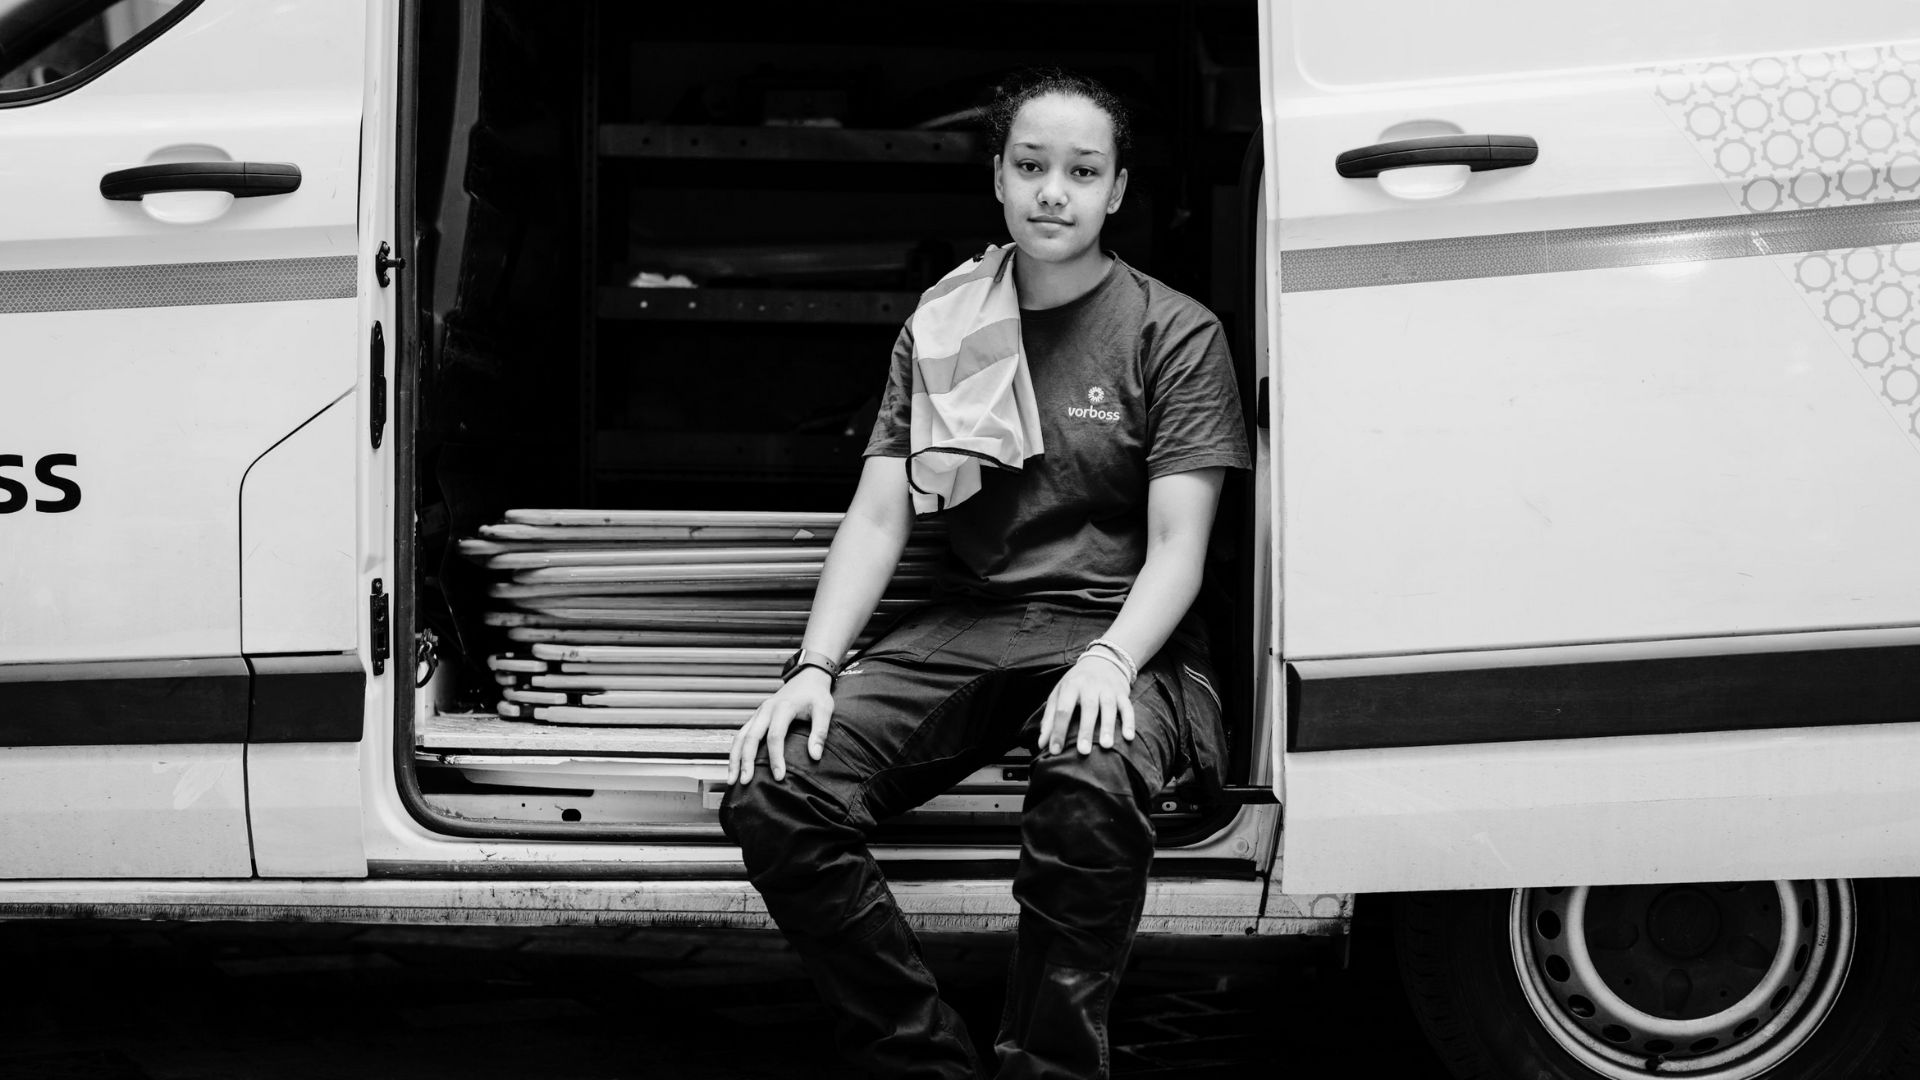 An Insightful Interview with Vorboss Installation Technicians Caprice and Acacia